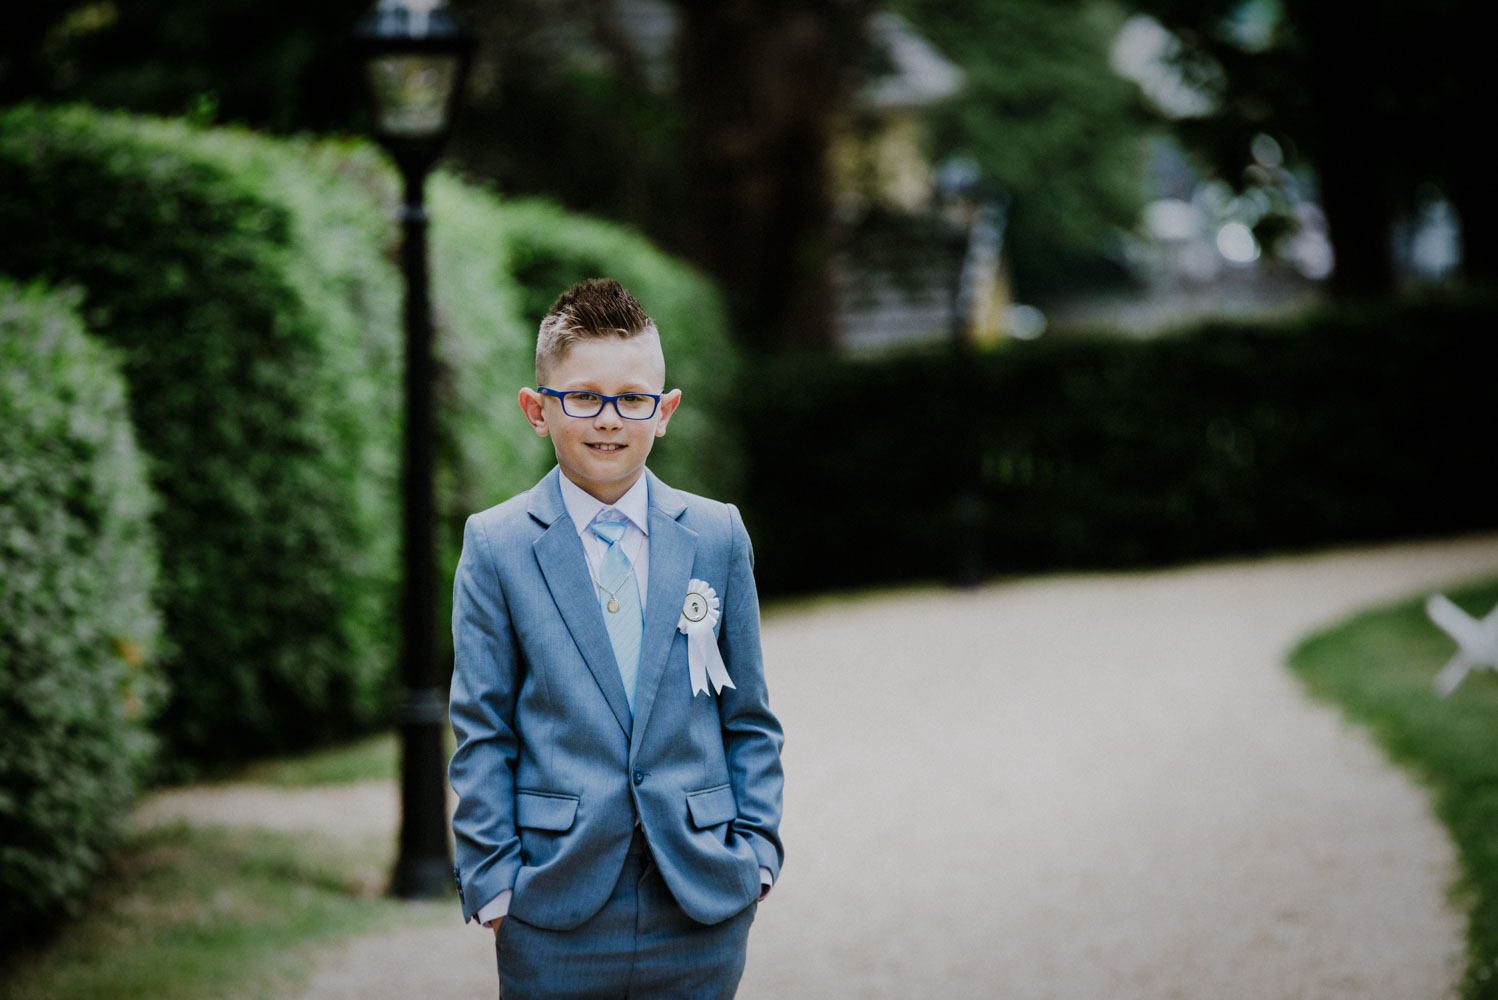 Nikodem and his Communion Day 26.05.18